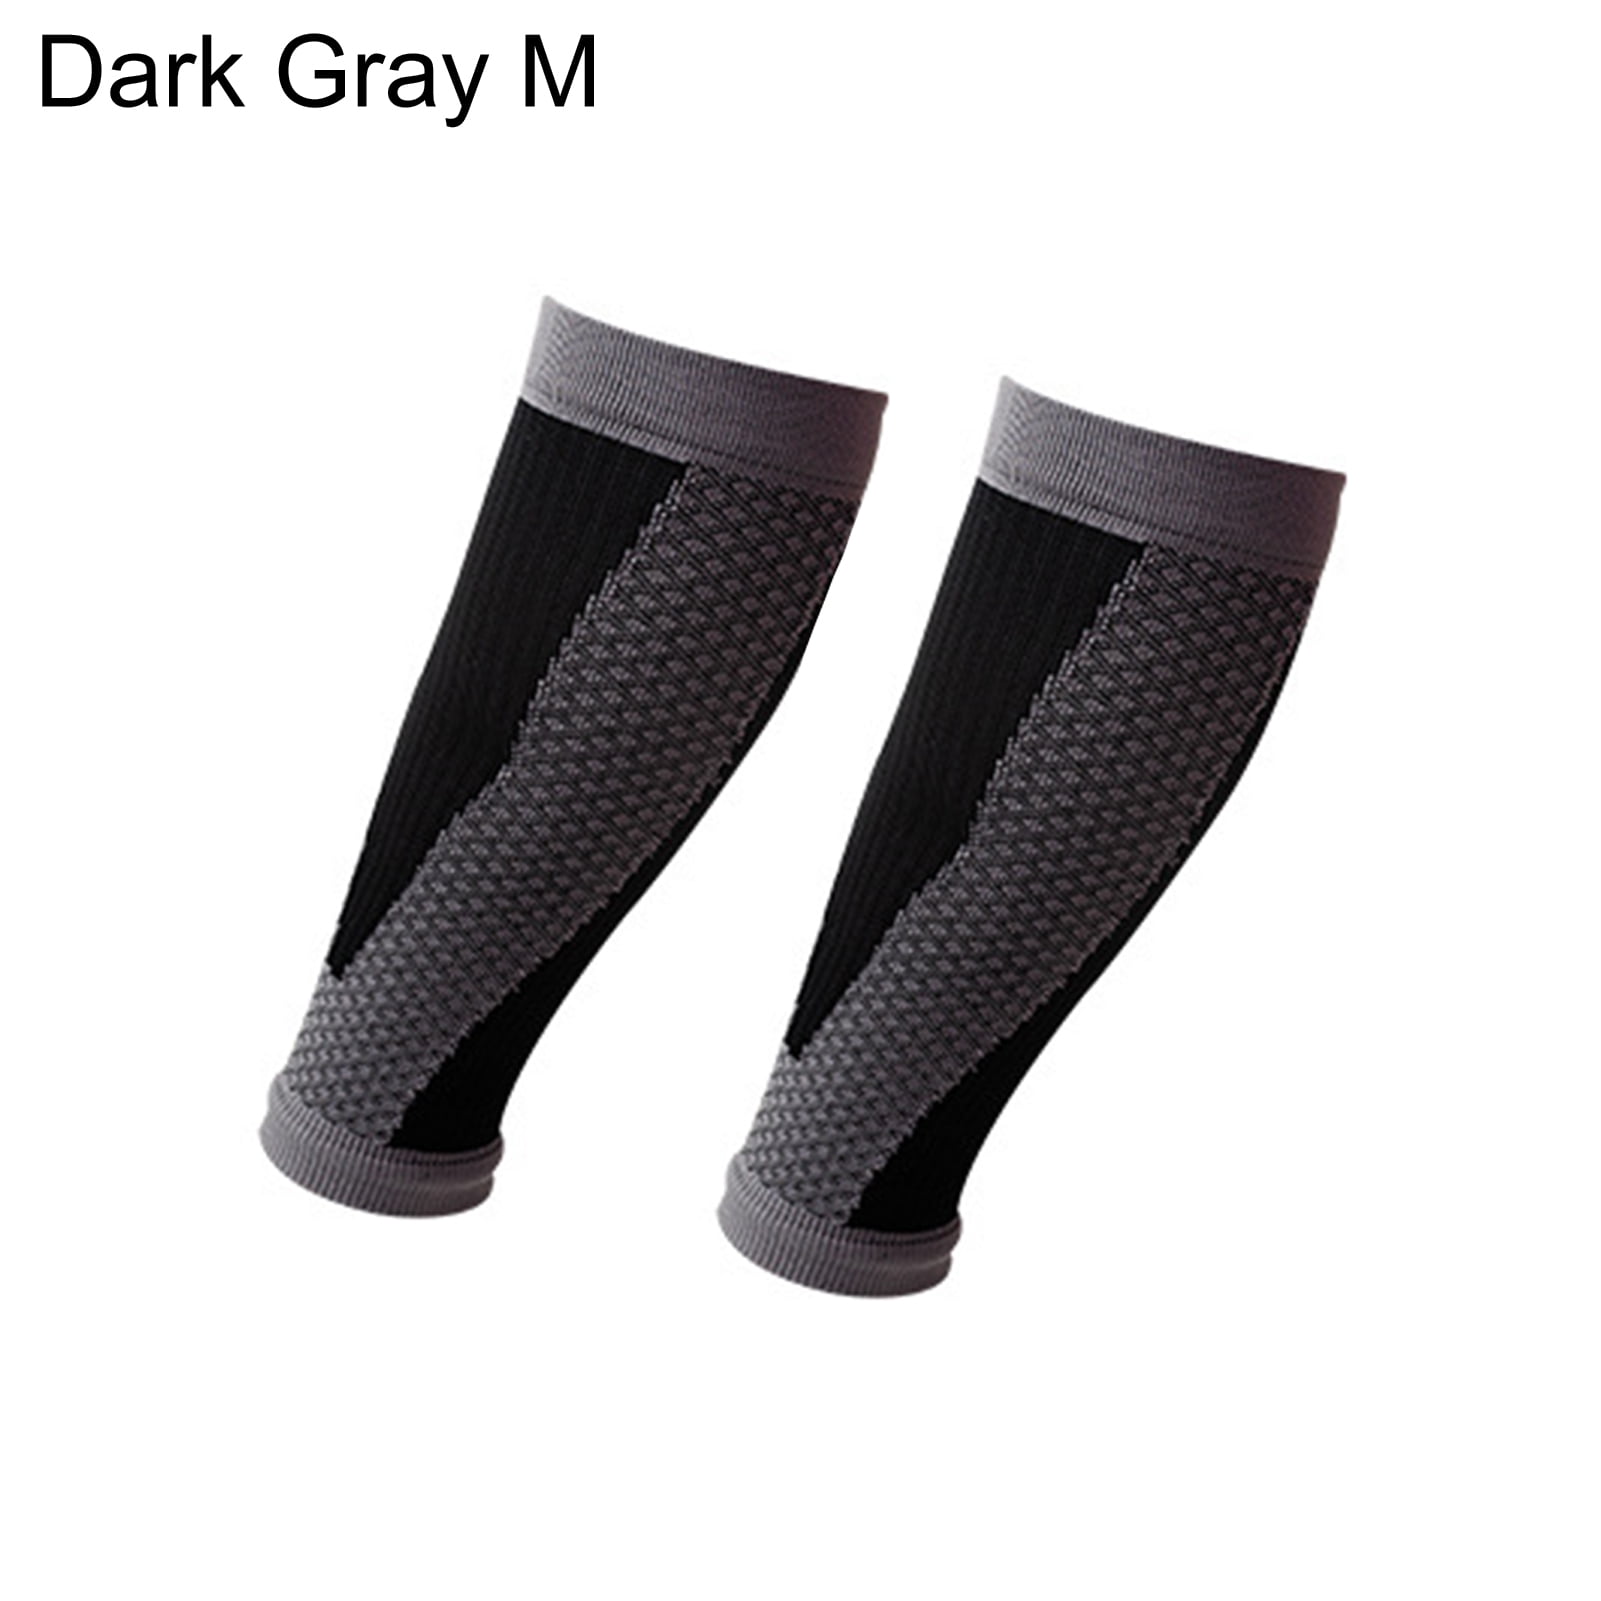 FREE 🚚] 1Pcs Calf compression sleeve for man women leg support for biking, basketball,cycling, fishing leg brace leg supporter relief, Health &  Nutrition, Braces, Support & Protection on Carousell